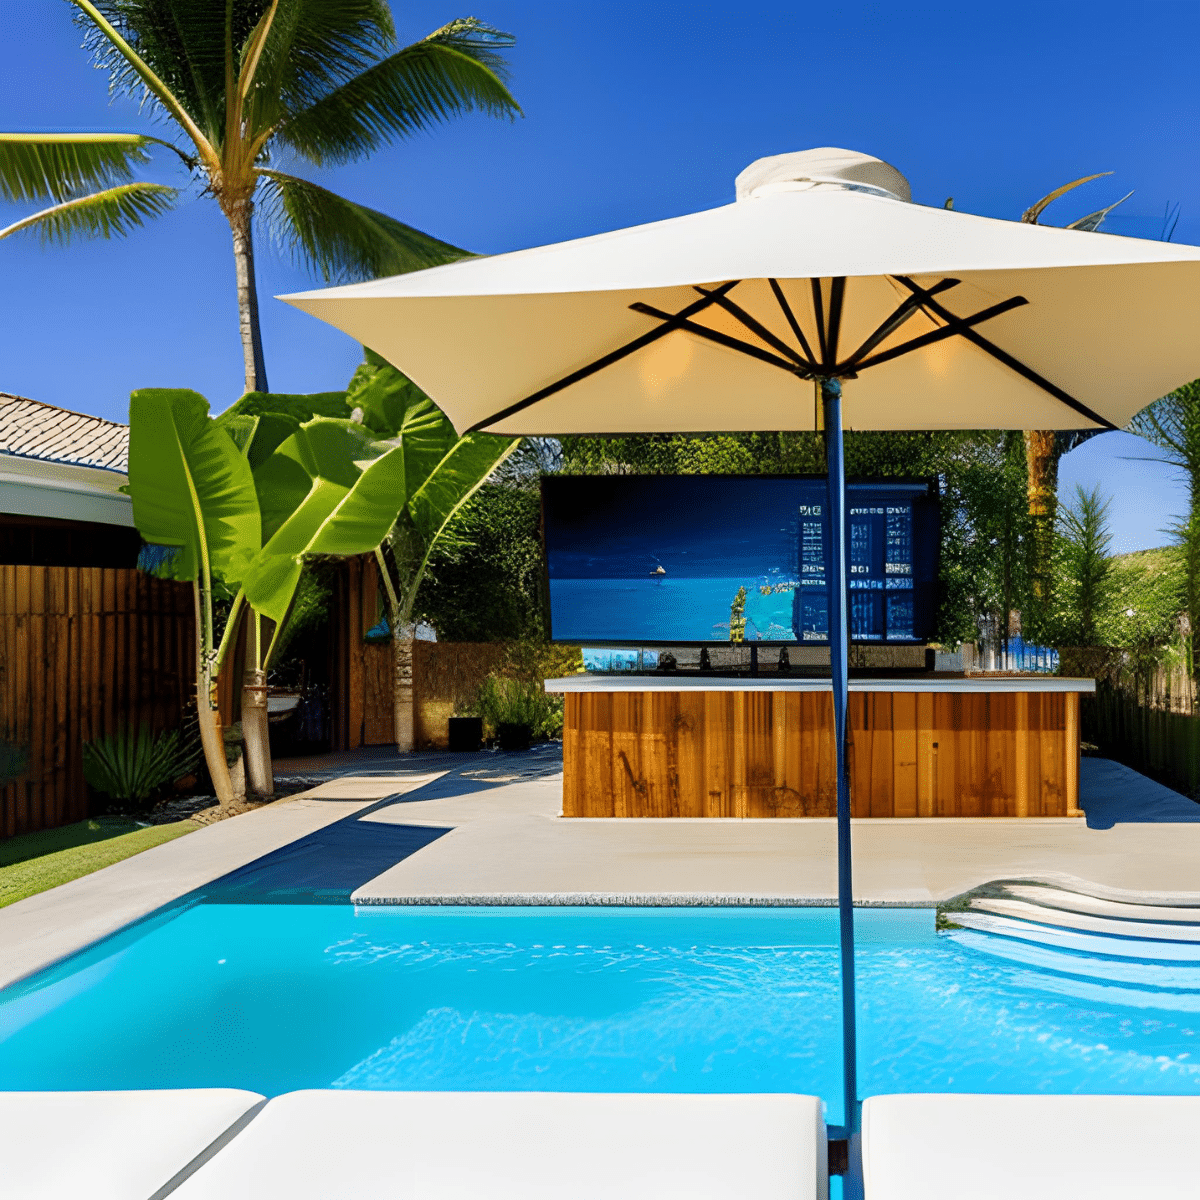 surf shack-style bar and flat-screen TV near pool with pool-side umbrella